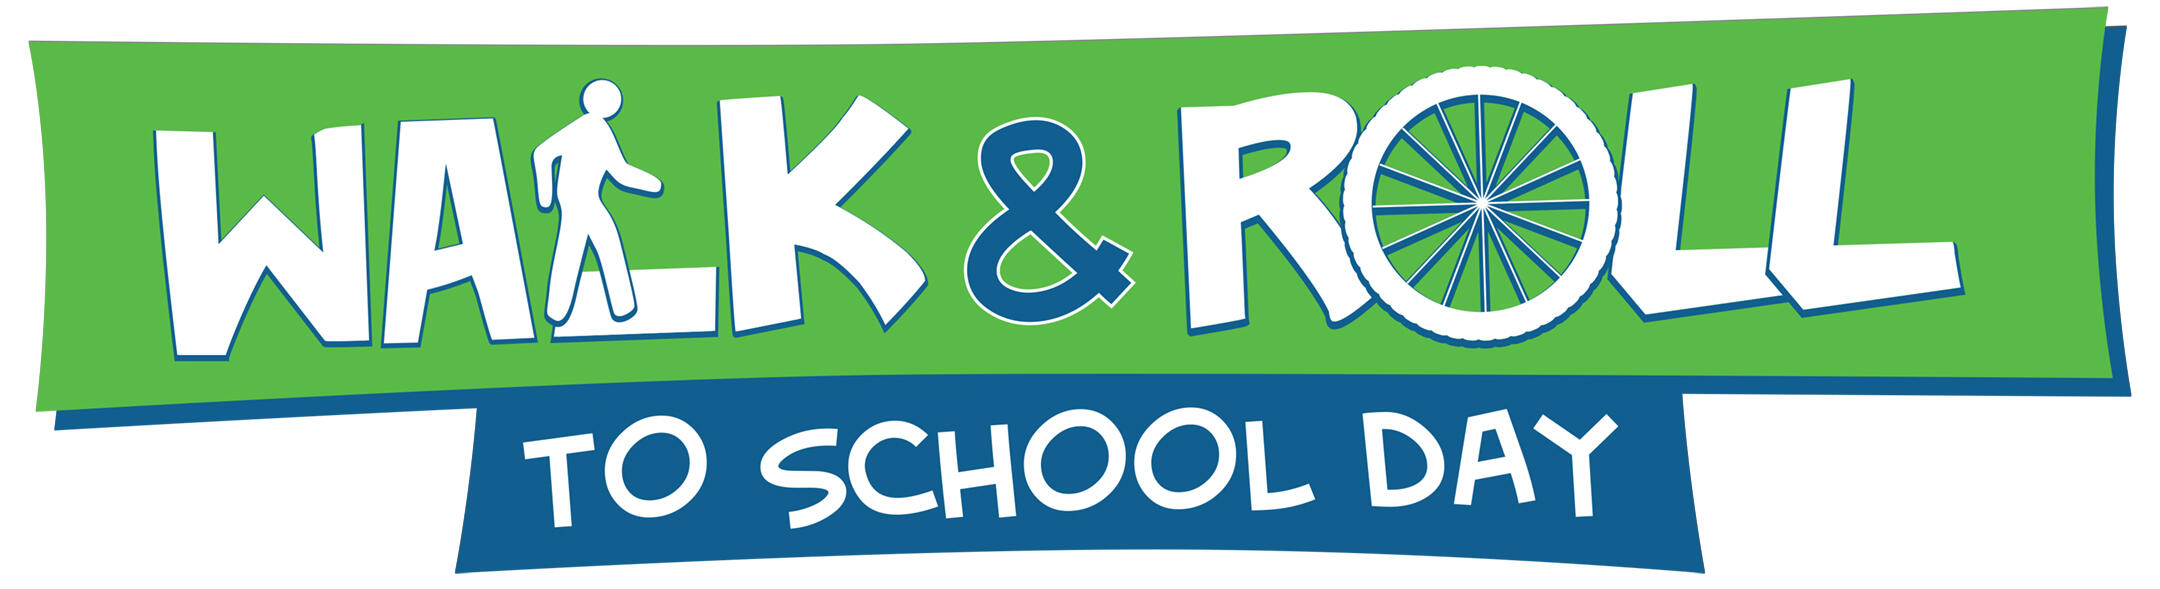 Walk and Roll to School Day logo